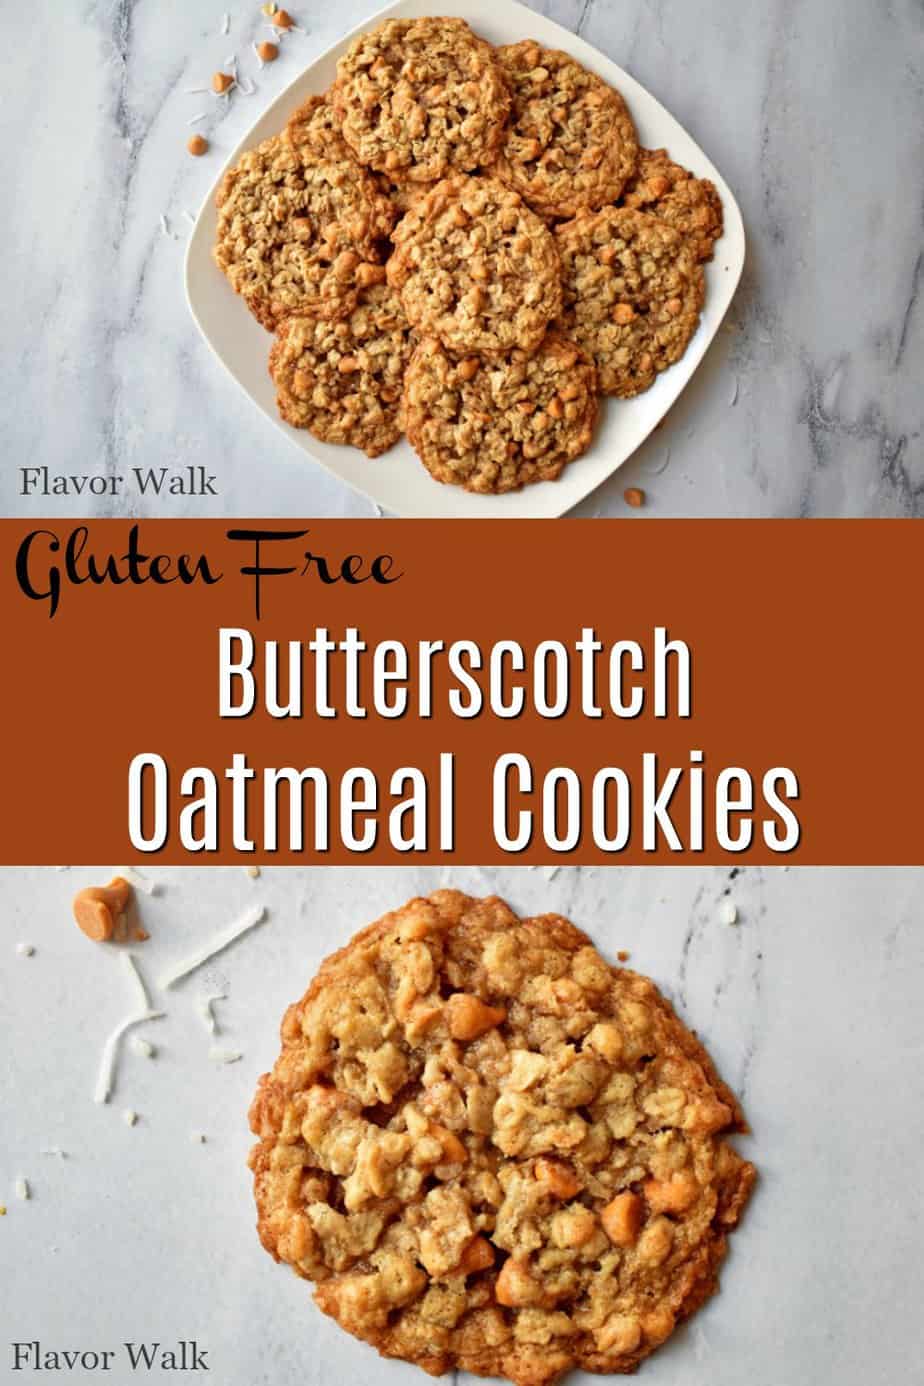 These butterscotch oatmeal cookies with toasted coconut are sweet and chewy. This easy gluten free recipe is a new twist on an old classic.